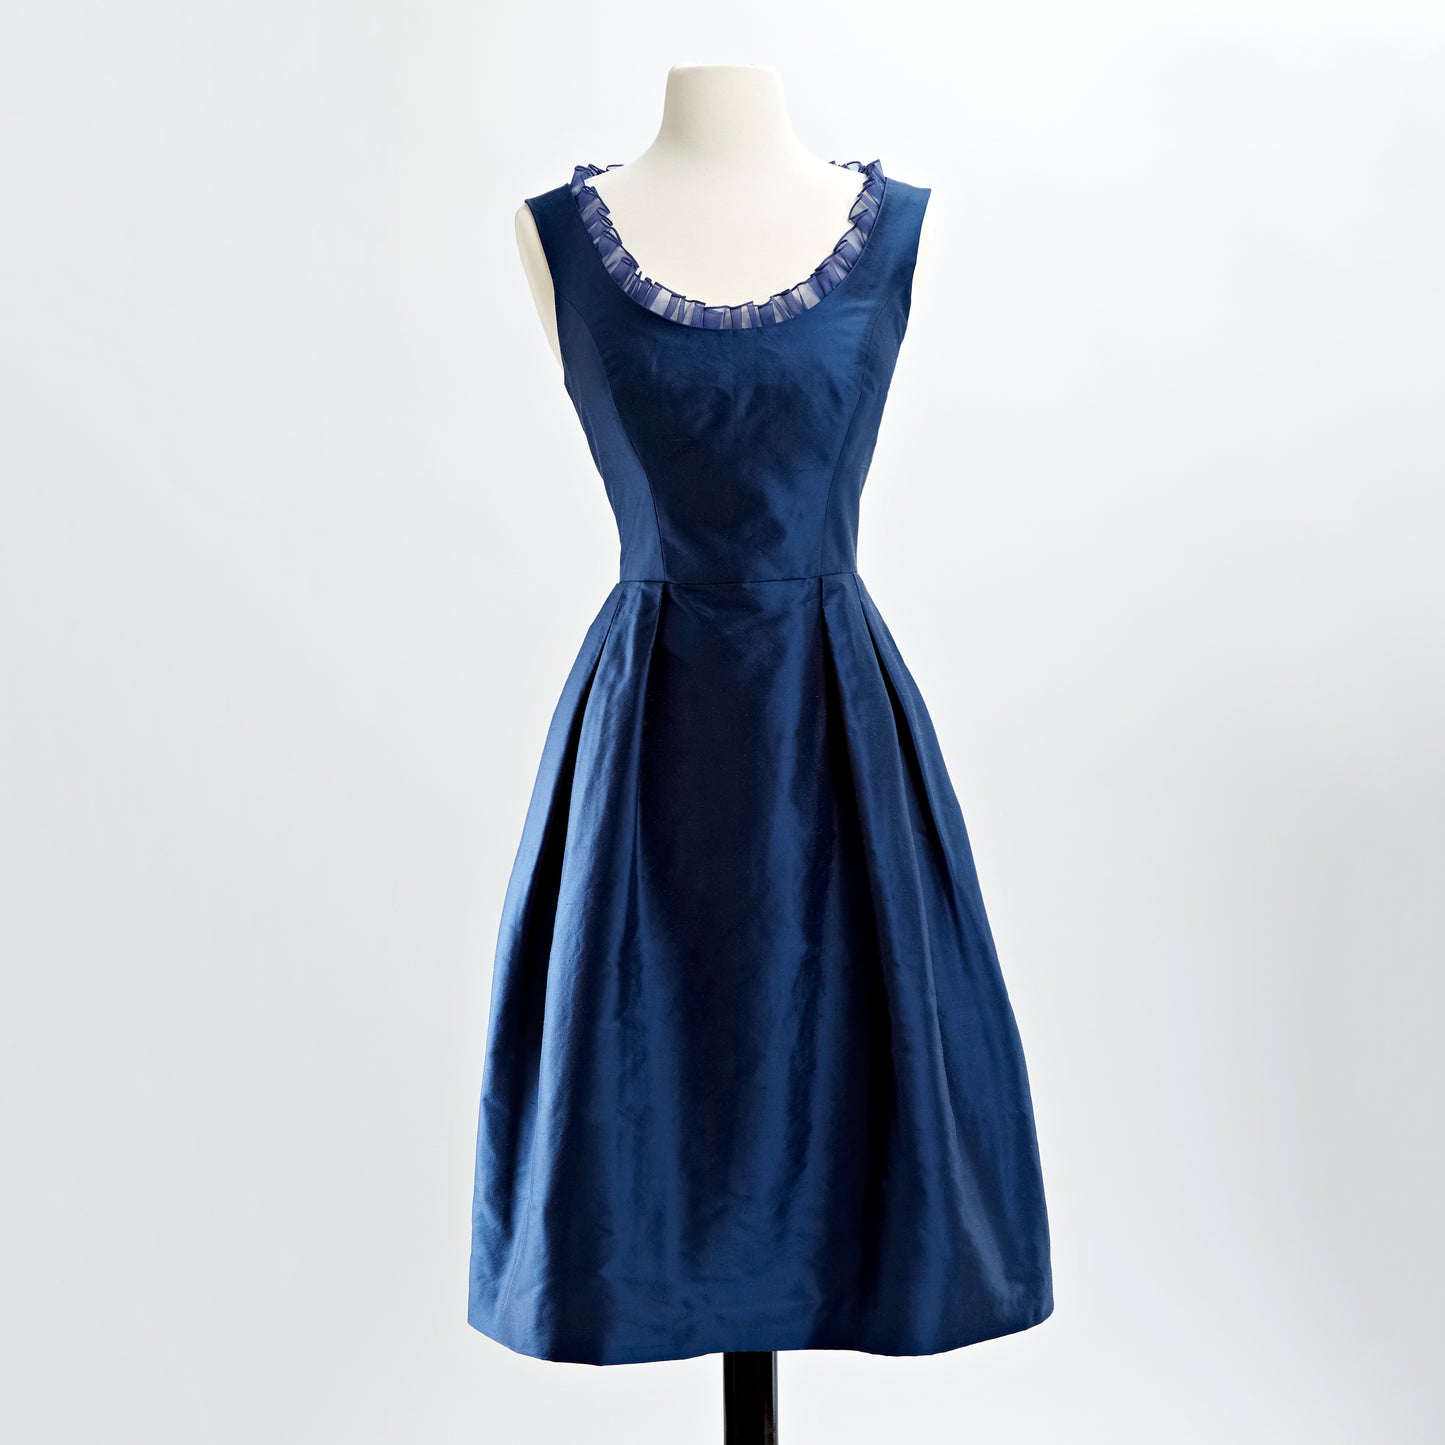 Cobalt blue shantung cocktail dress with scoop neck with inset organza ruffle and pleated skirt